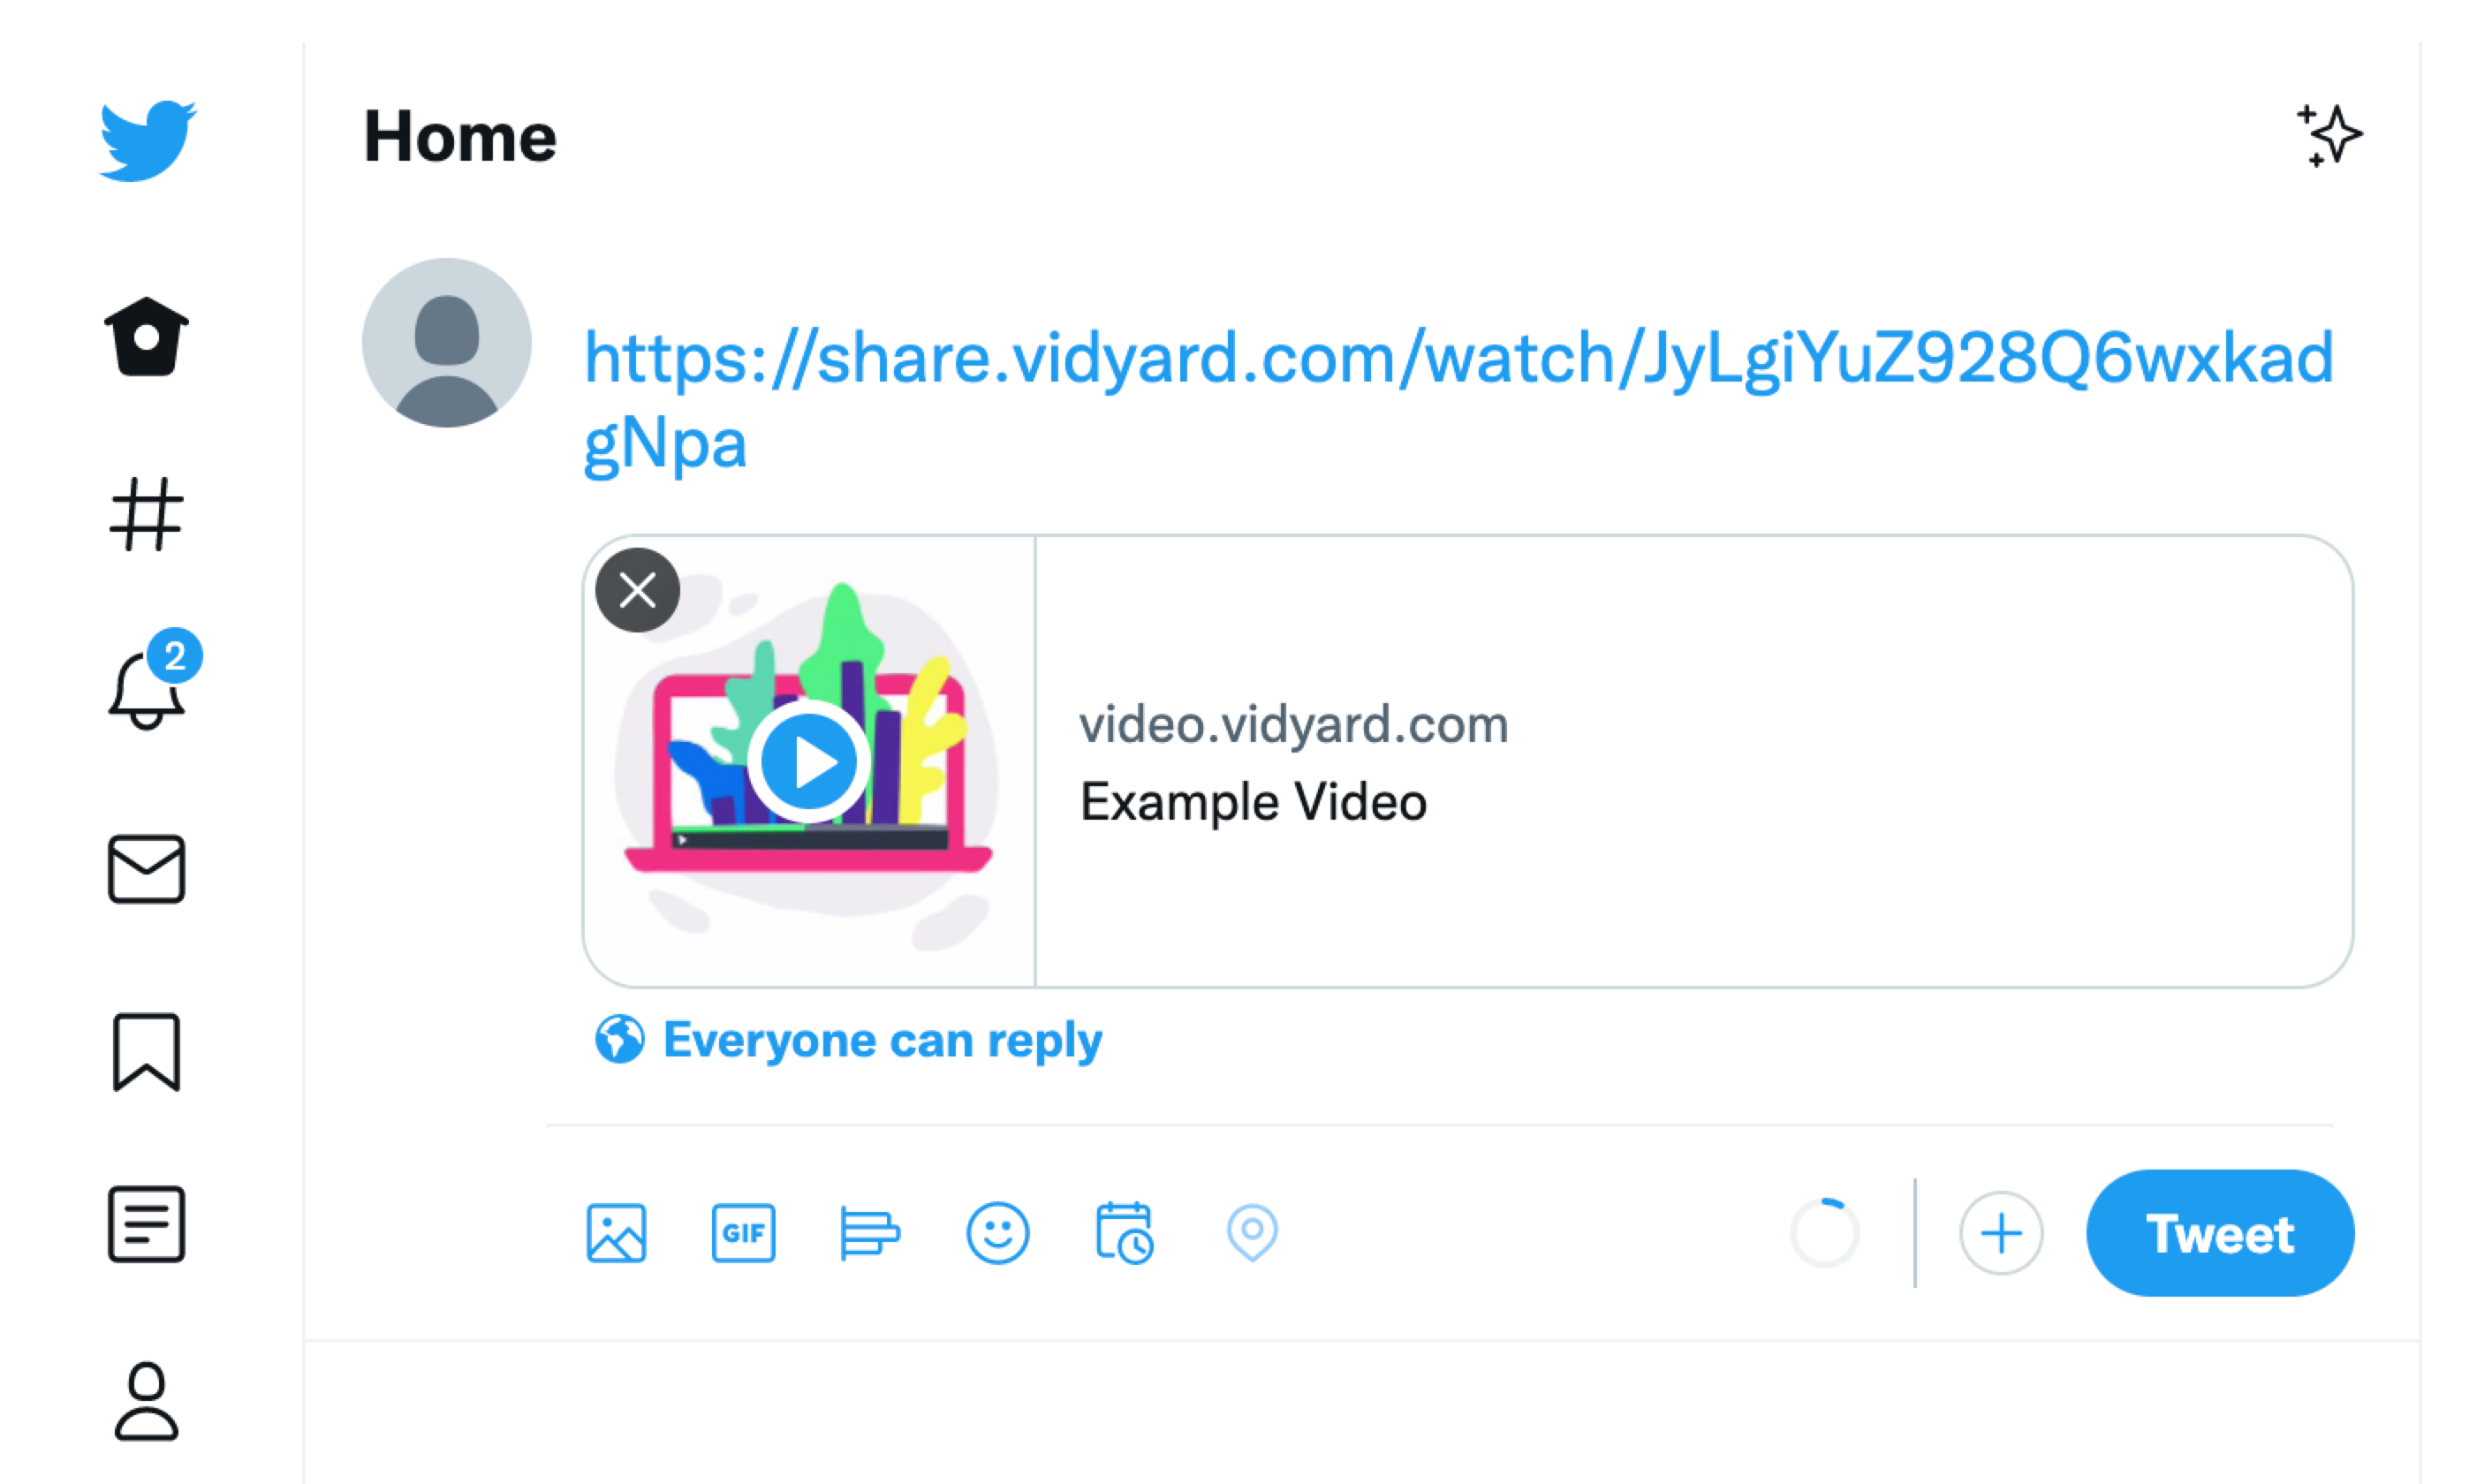 Example of Vidyard video being shared on a tweet within Twitter platform